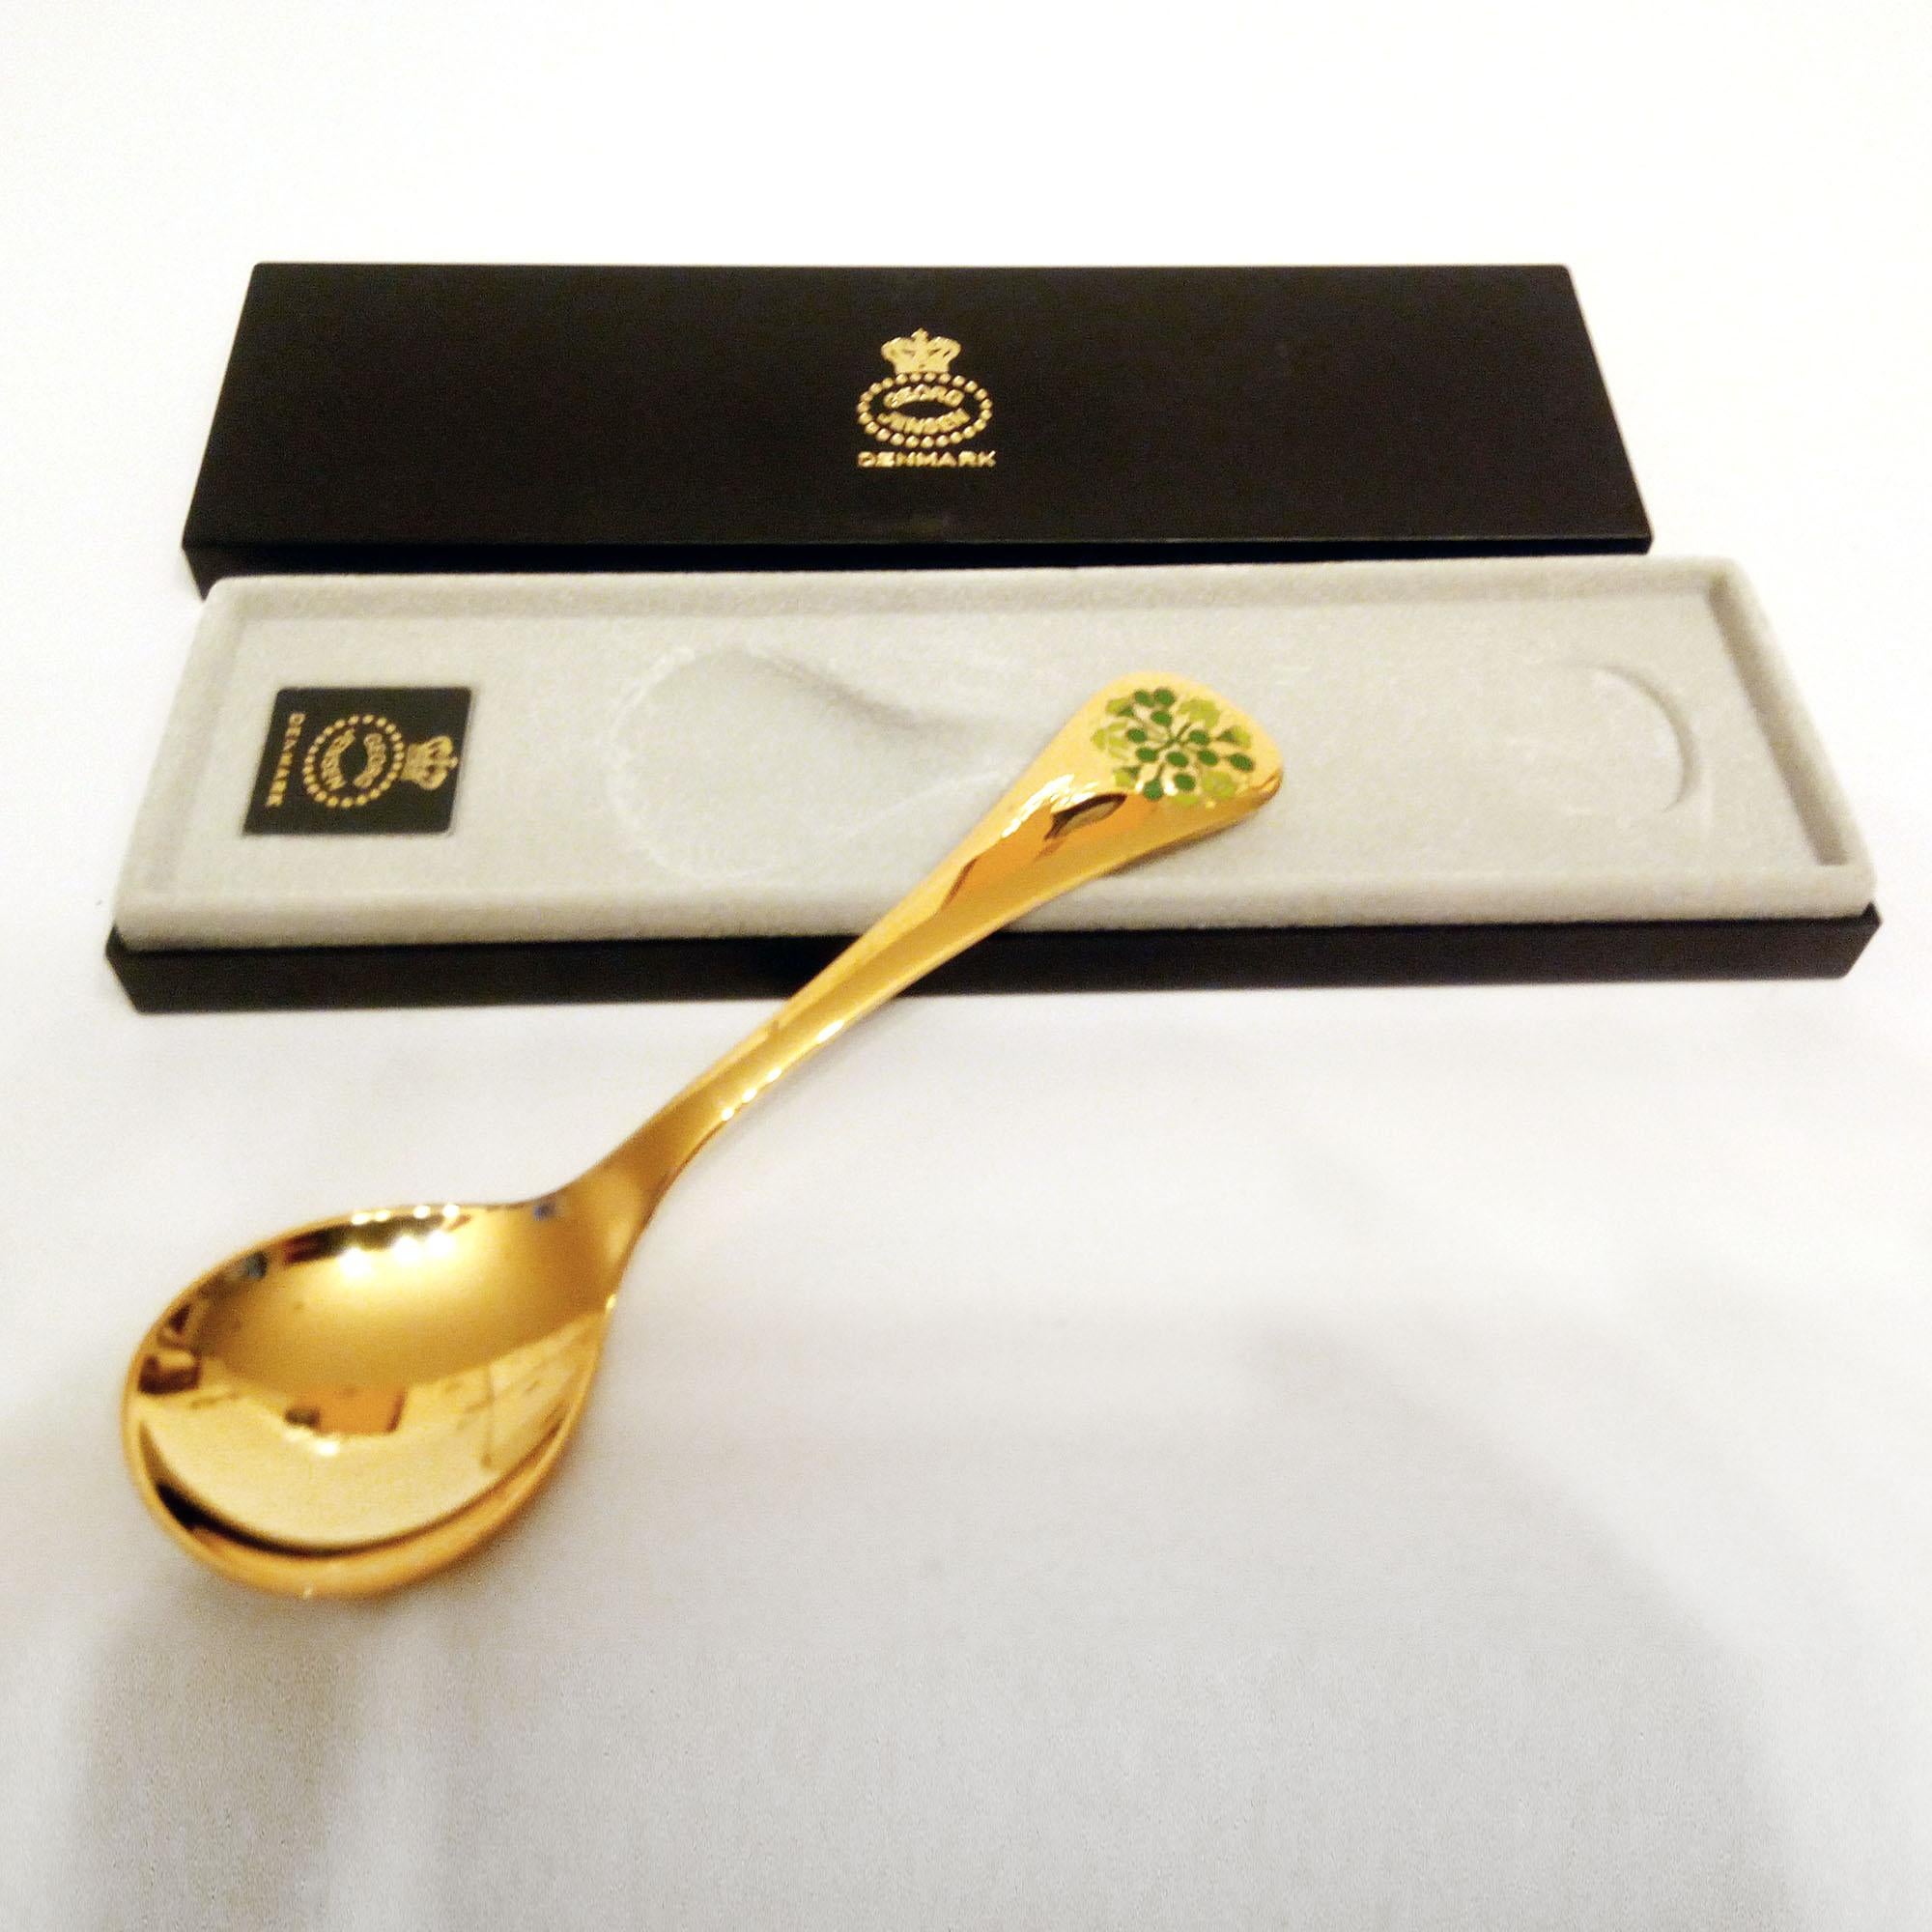 Annual spoon 1989 in original box, designed by Annelise Björner, edited by Georg Jensen.
Annual spoons series began in 1971. Each spoon is crafted in sterling silver, then gold-plated and enameled with a wildflower chosen for that year. The 1989